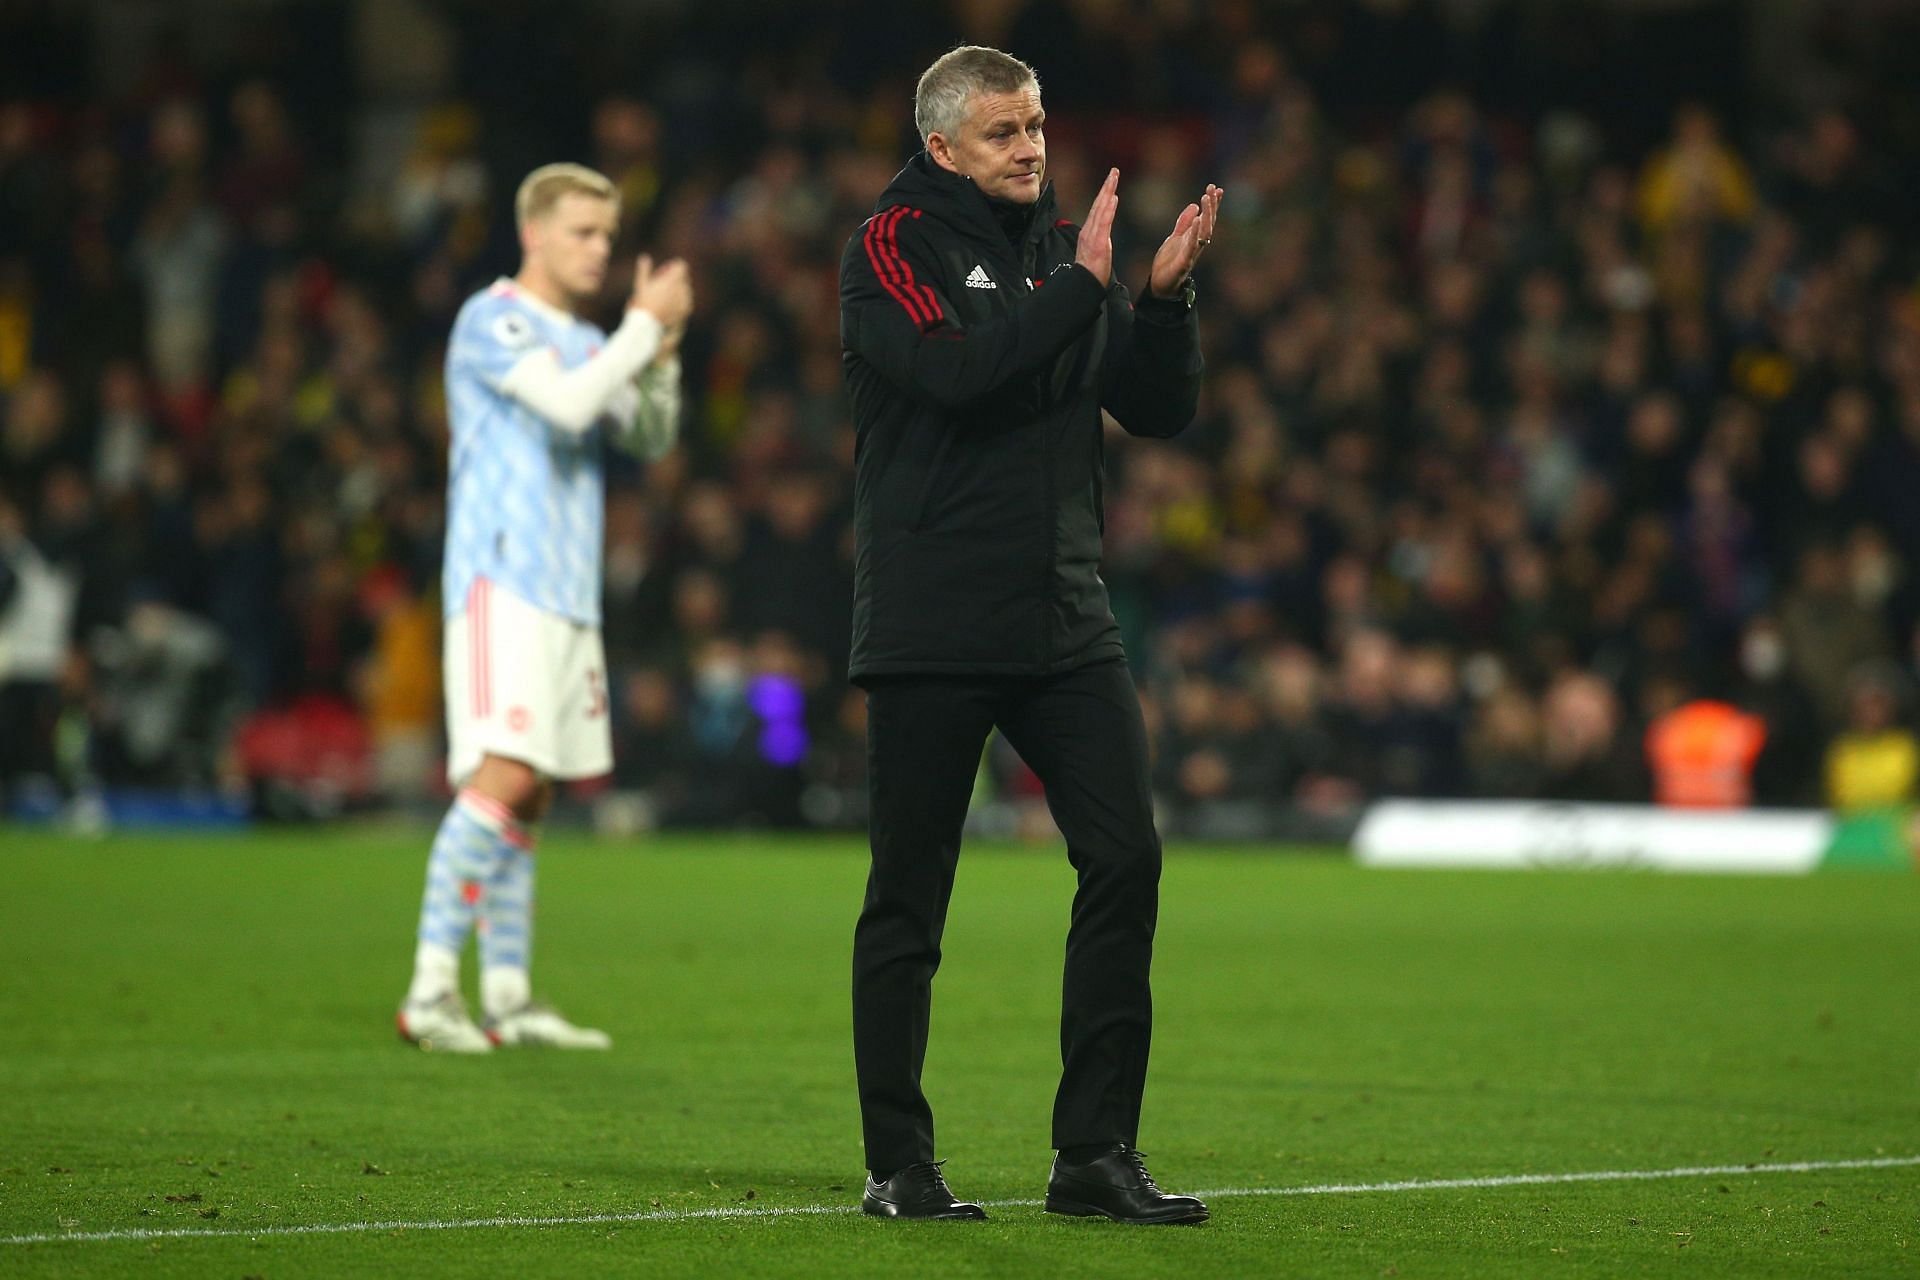 The defeat to Watford sawSolskjaer sacked as Manchester United manager